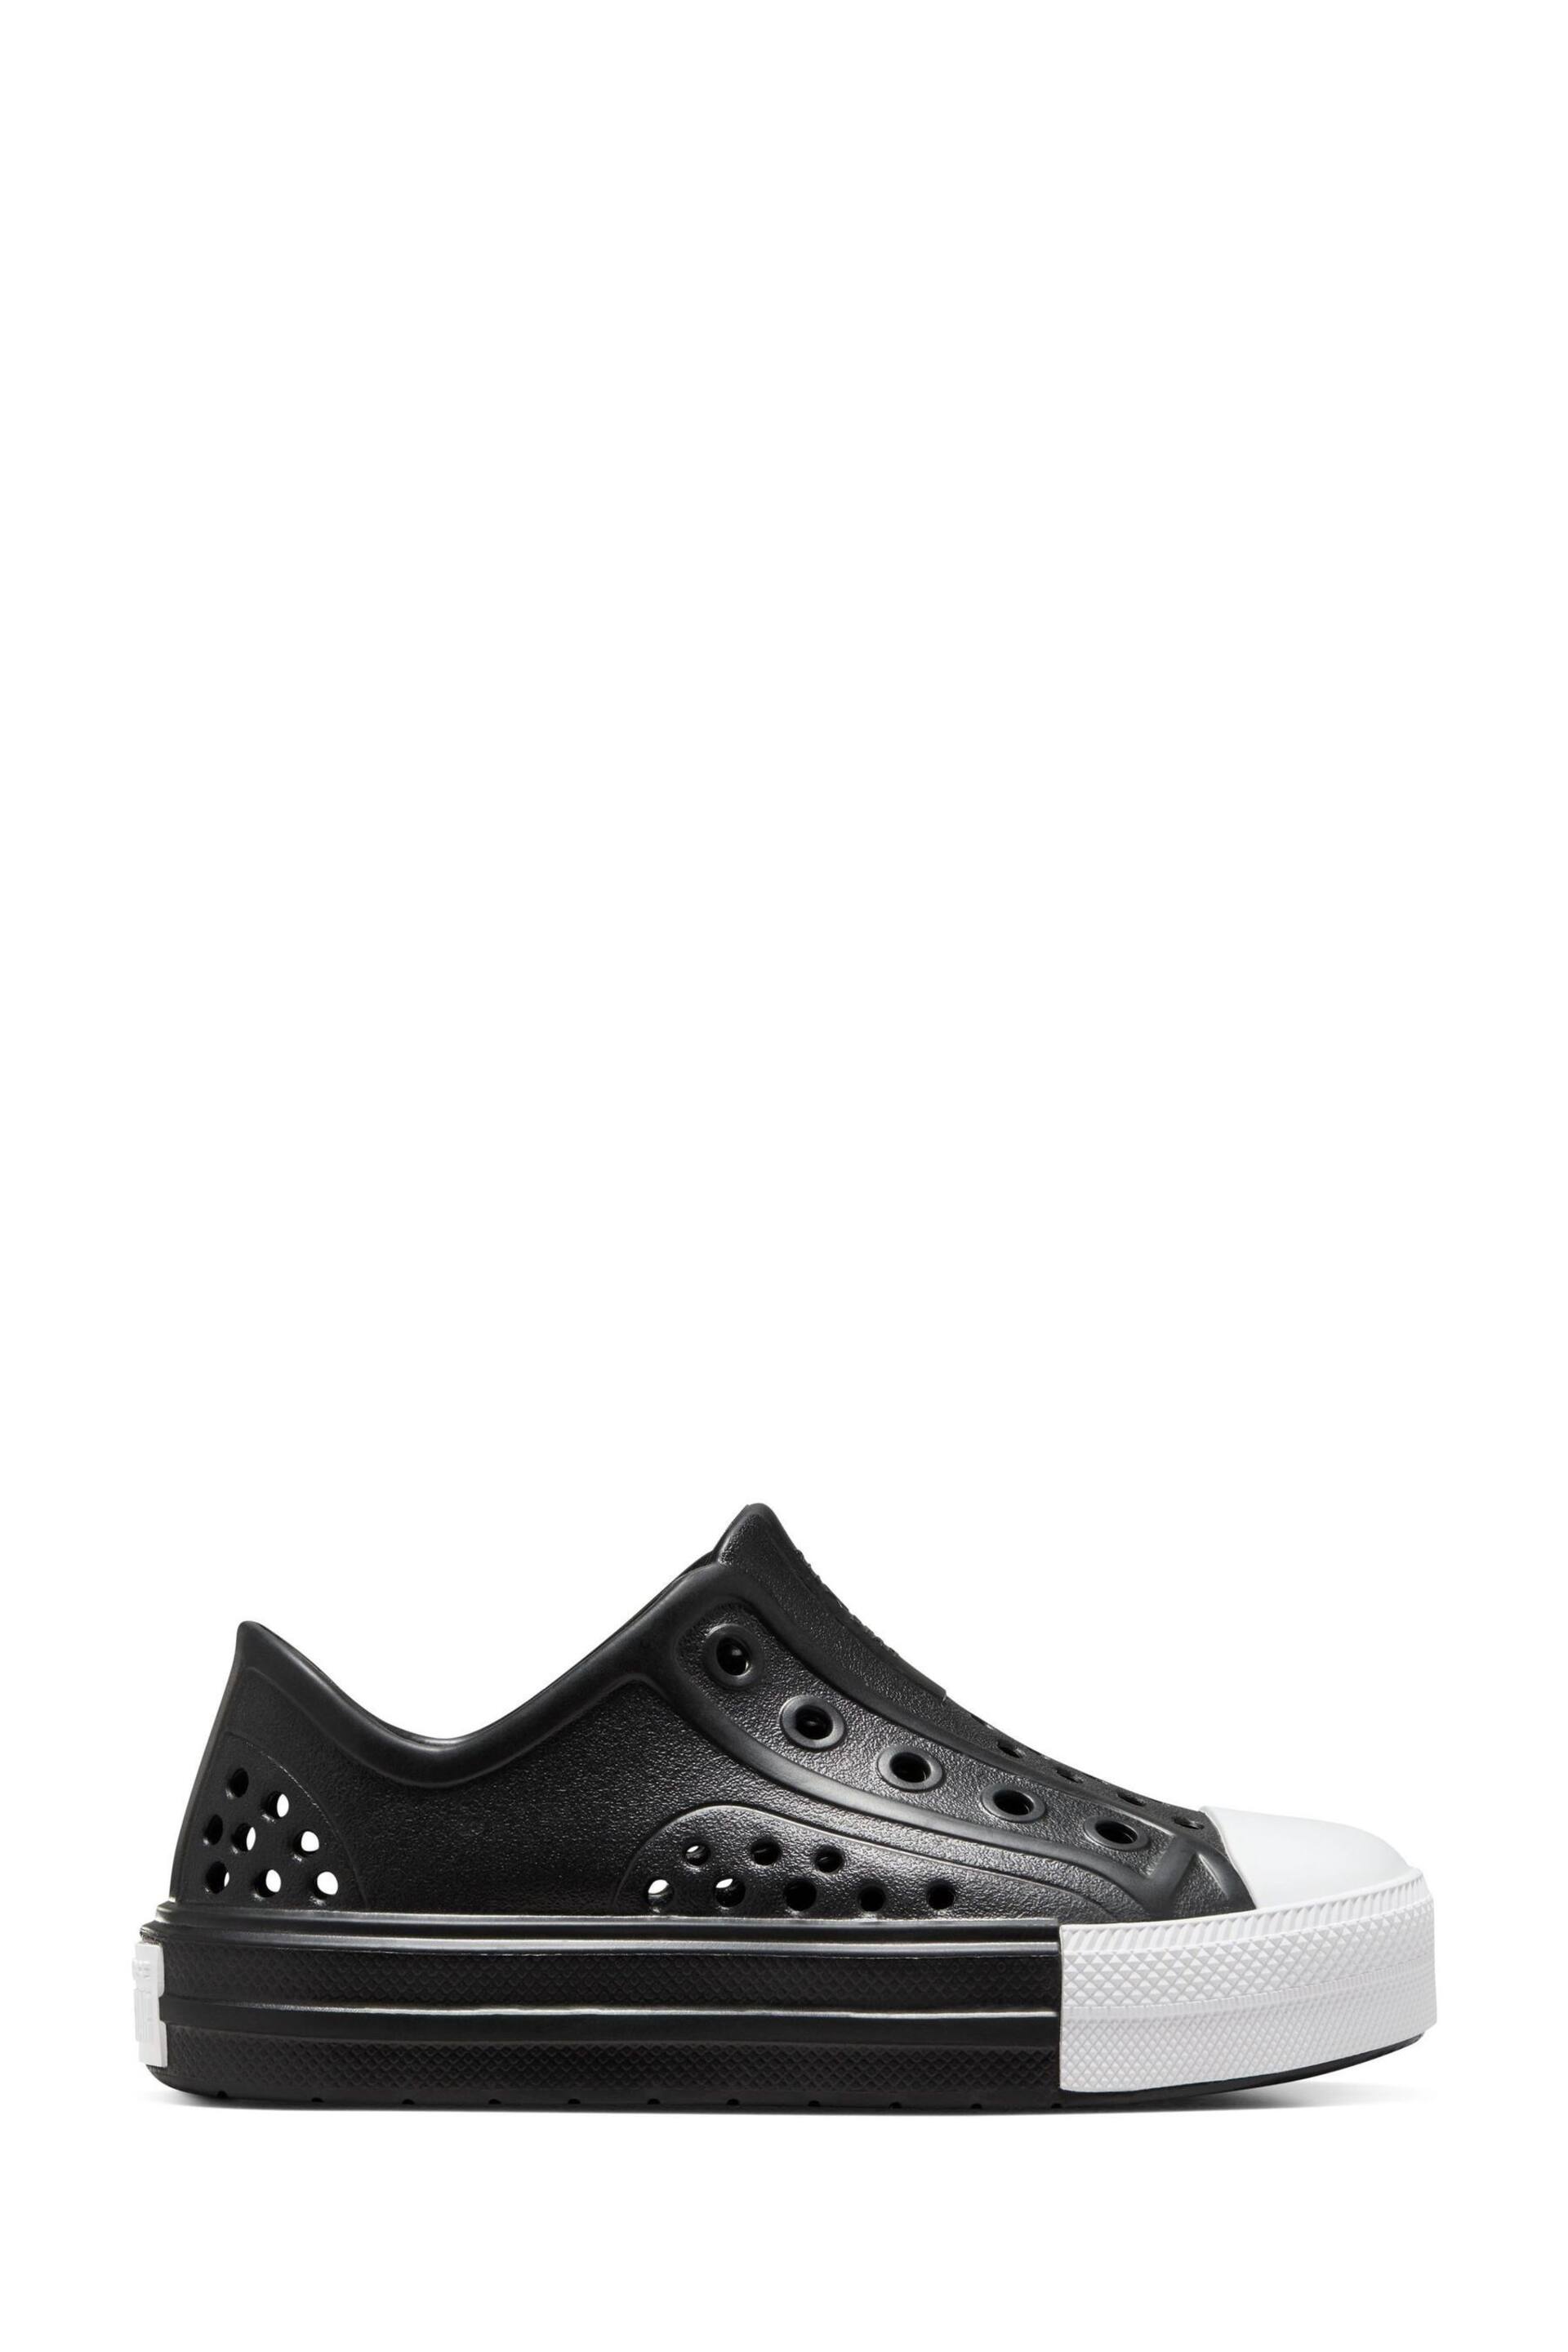 Converse Black Chuck Taylor All Star Play Lite Cx Sandals - Image 1 of 9